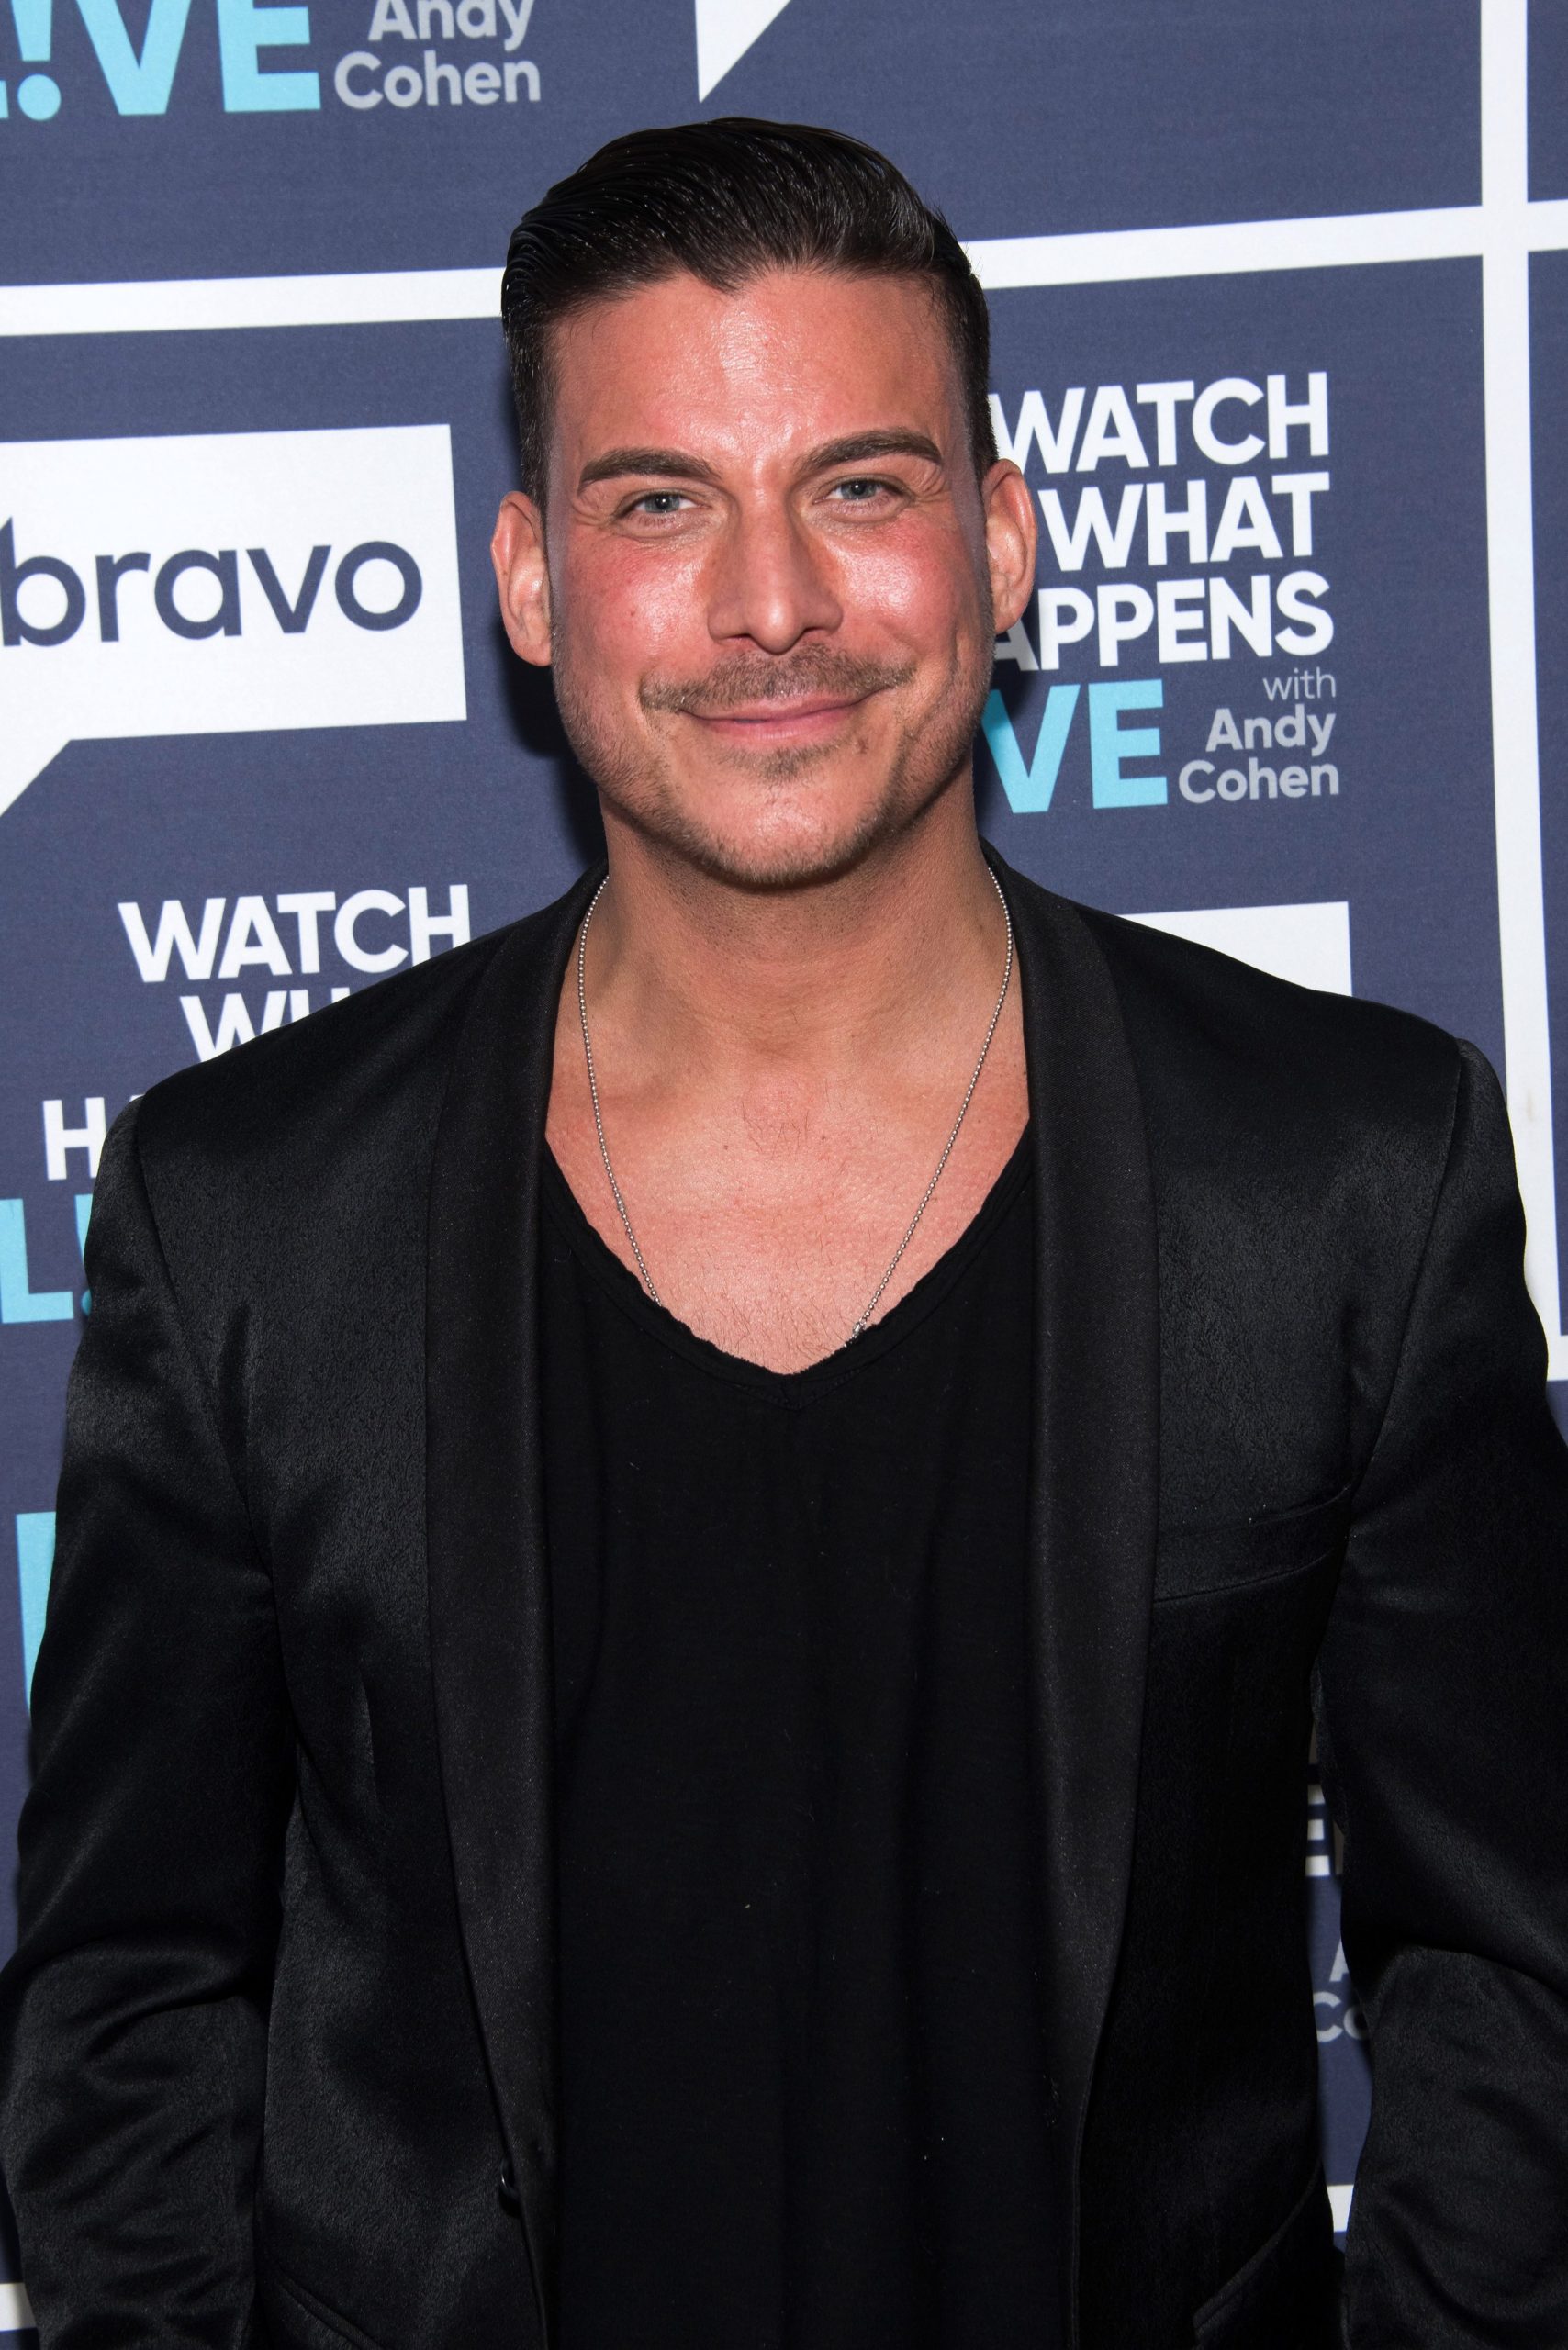 Who Is Jax Taylor? How Did He Famous?